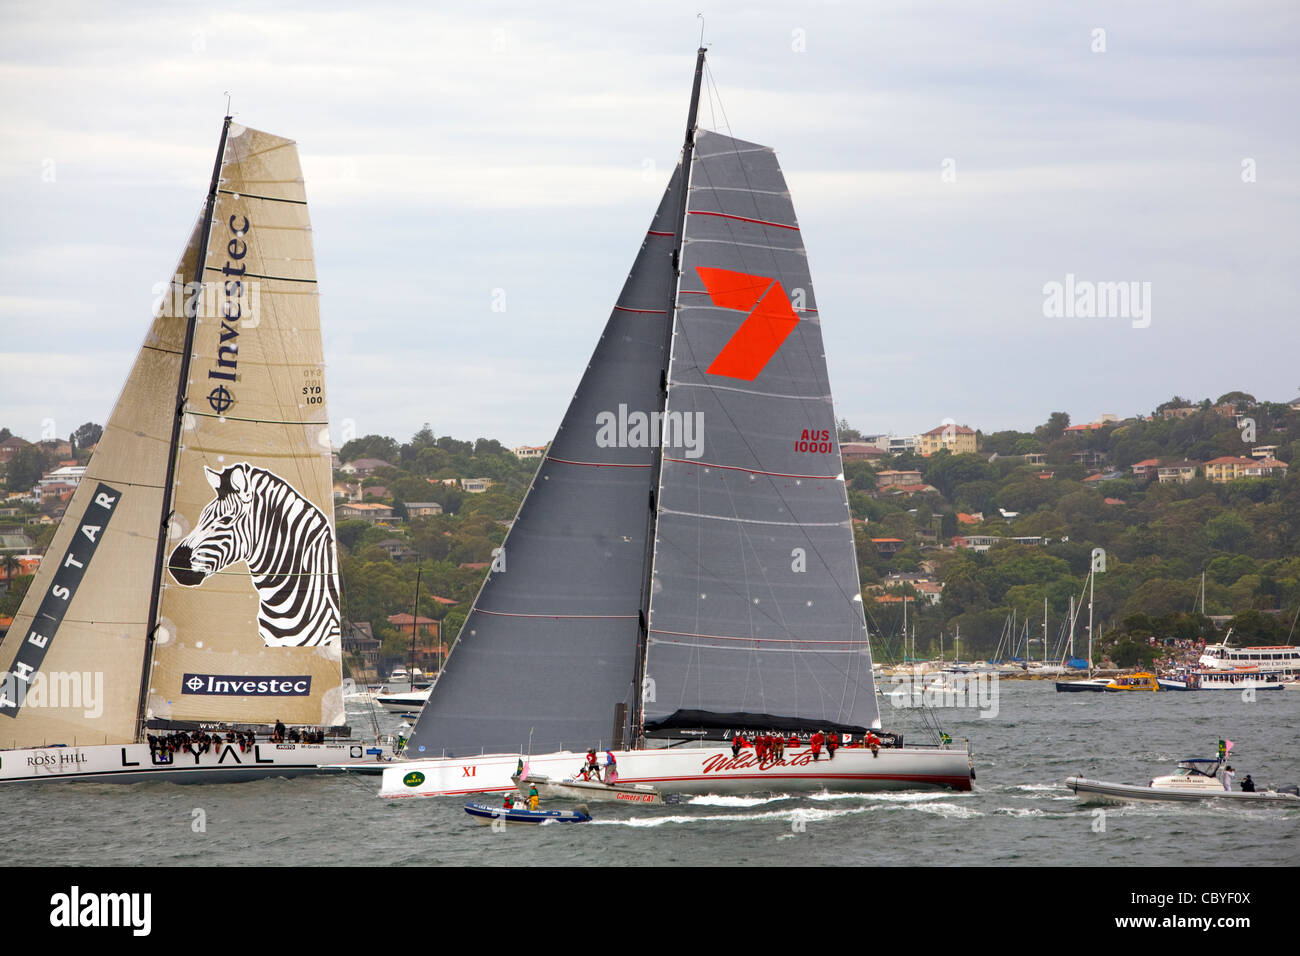 investec loyal and wild oats x1 at the start of the 2011 sydney to hobart yacht race. these yachts finished first and second Stock Photo